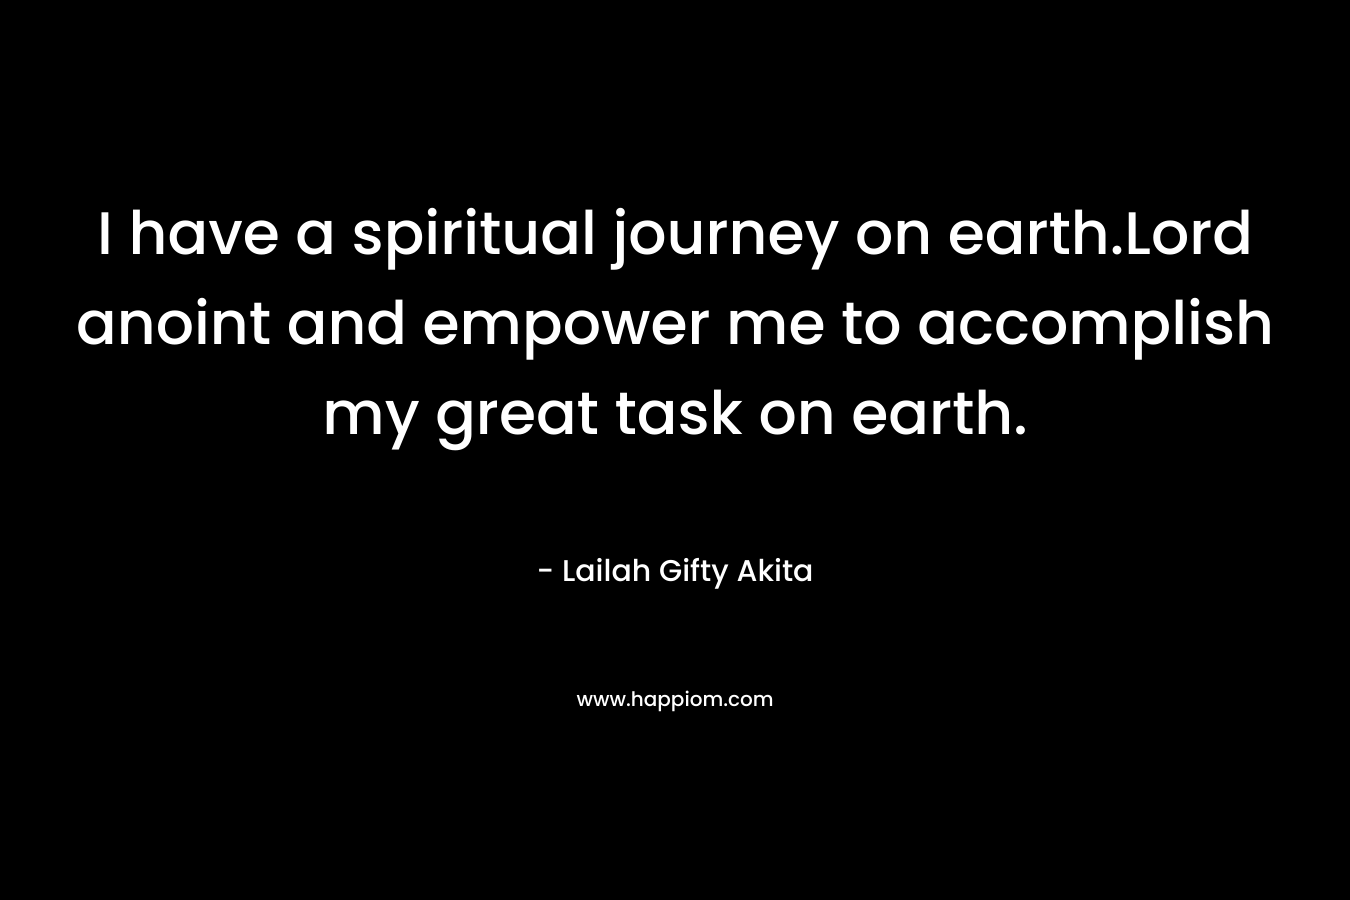 I have a spiritual journey on earth.Lord anoint and empower me to accomplish my great task on earth. – Lailah Gifty Akita